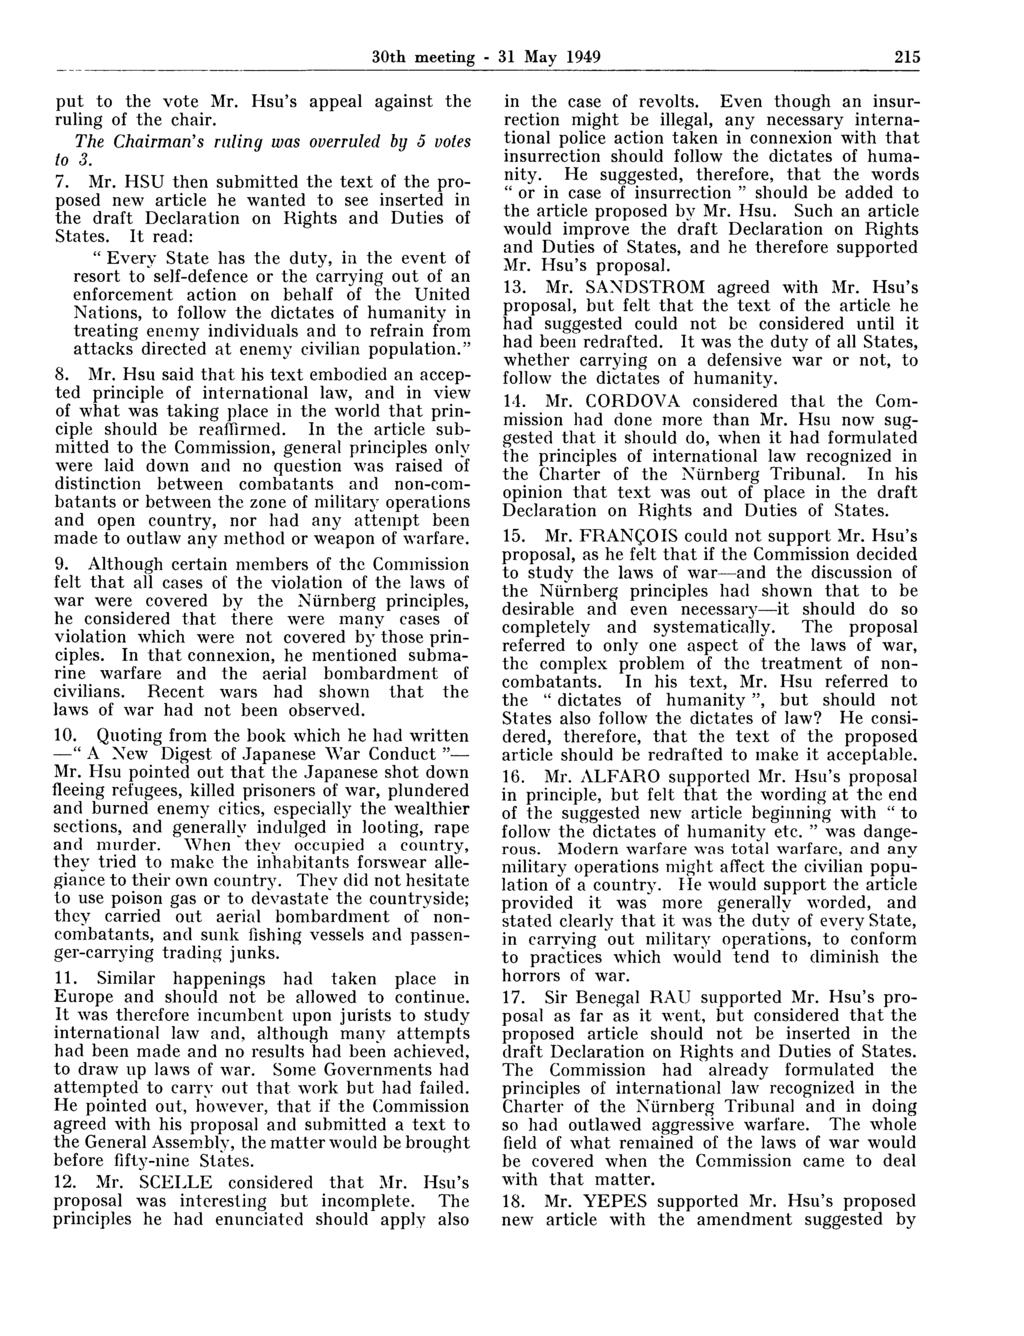 30th meeting - 31 May 1949 215 put to the vote Mr. Hsu's appeal against the ruling of the chair. The Chairman's ruling was overruled by 5 votes to 3. 7. Mr. HSU then submitted the text of the proposed new article he wanted to see inserted in the draft Declaration on Rights and Duties of States.